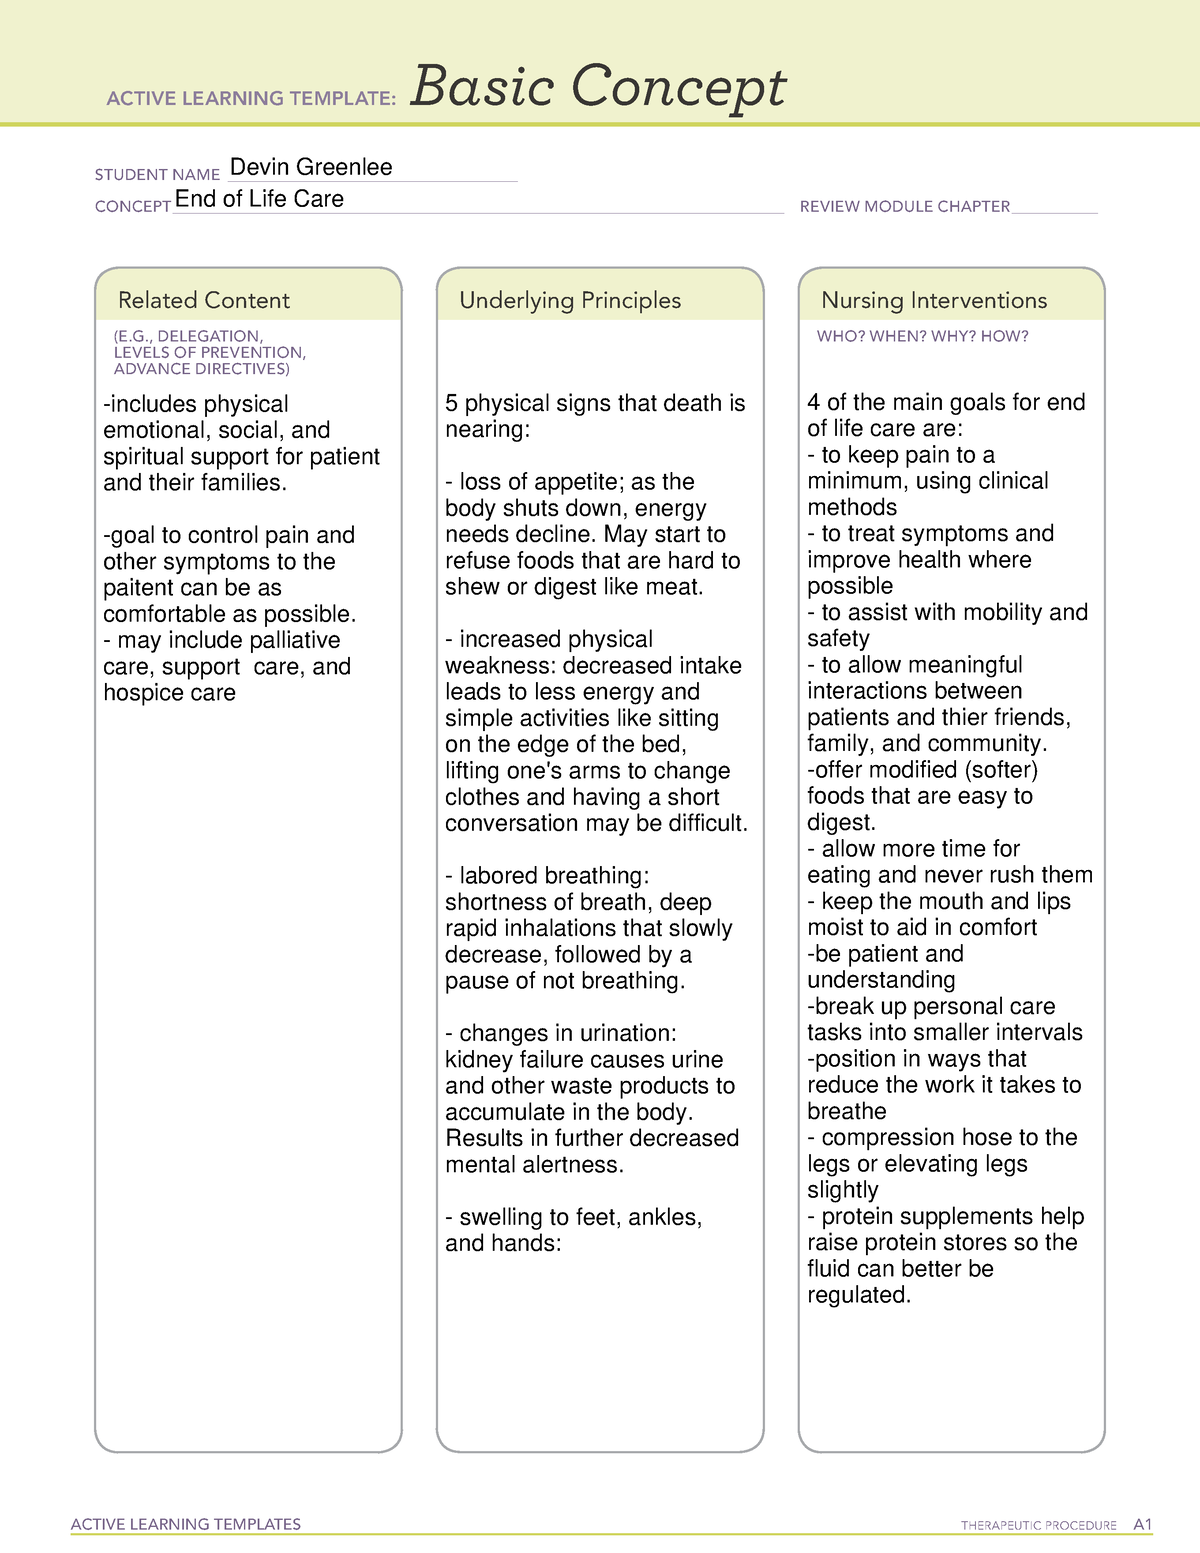 active-learning-template-basic-concept-active-learning-templates